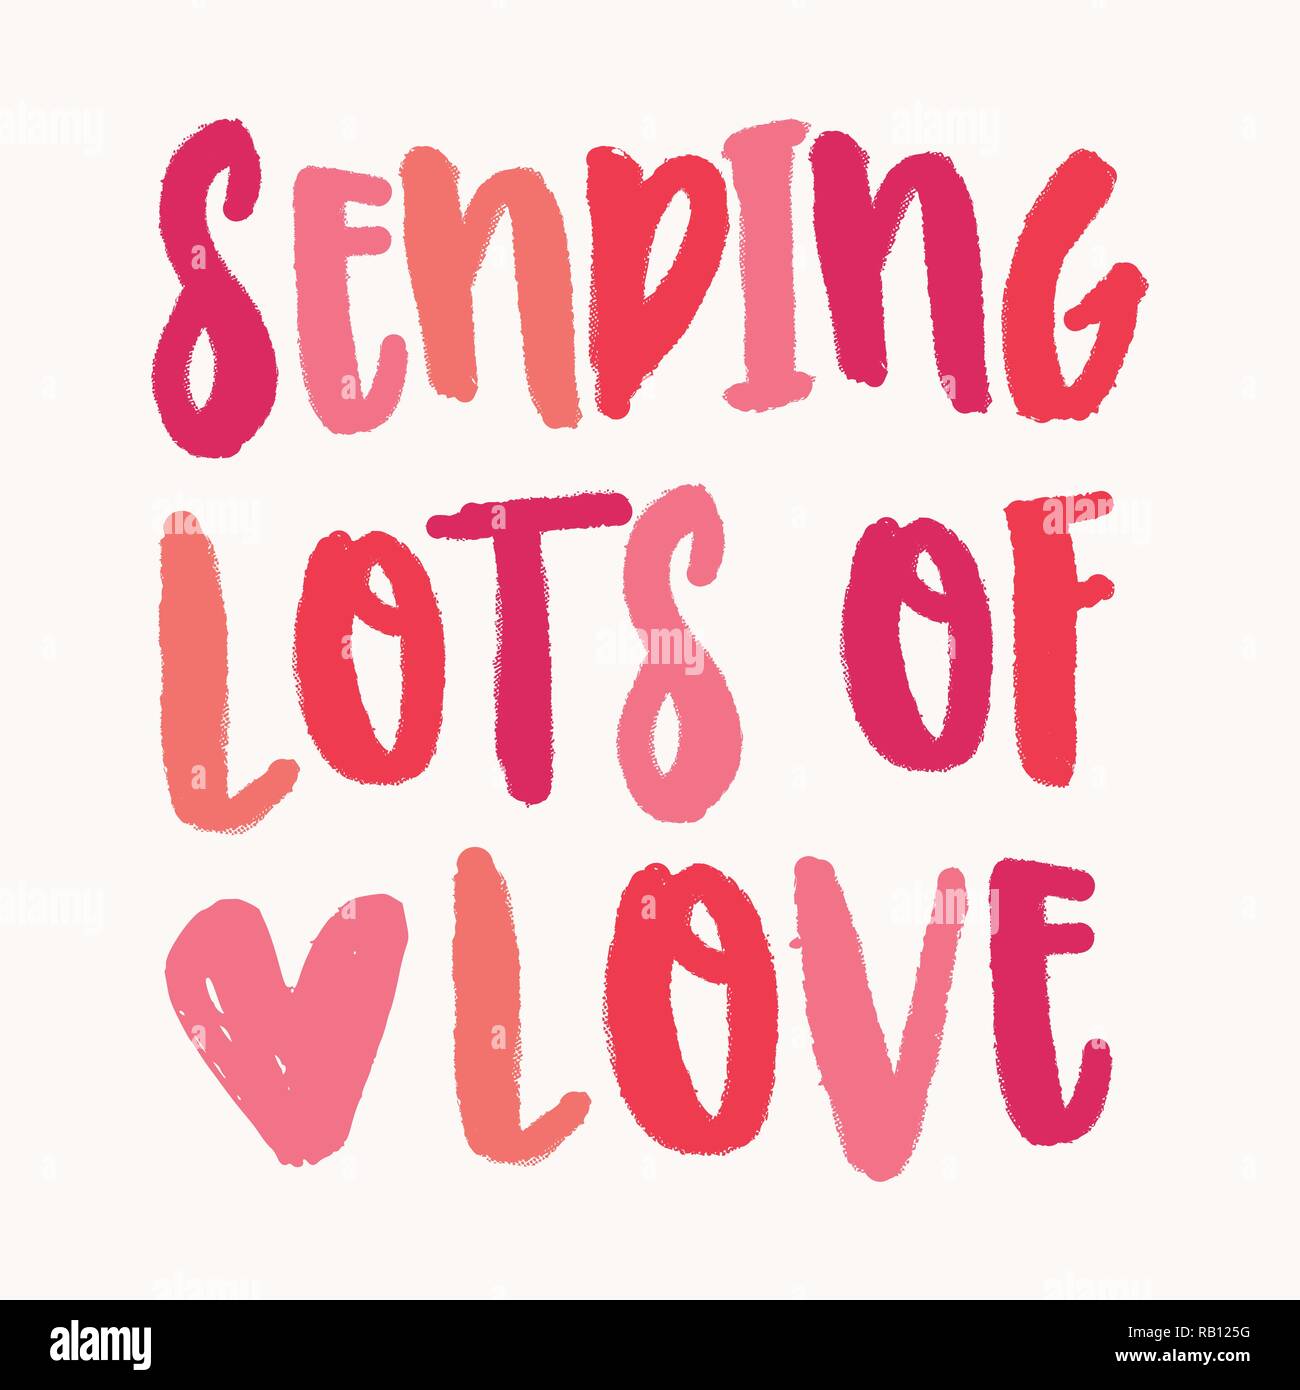 Sending Lots Of Love Valentine S Day Greeting Card Template With Colorful Typographic Design On White Background Cute And Playful Vector Romantic Ca Stock Vector Image Art Alamy